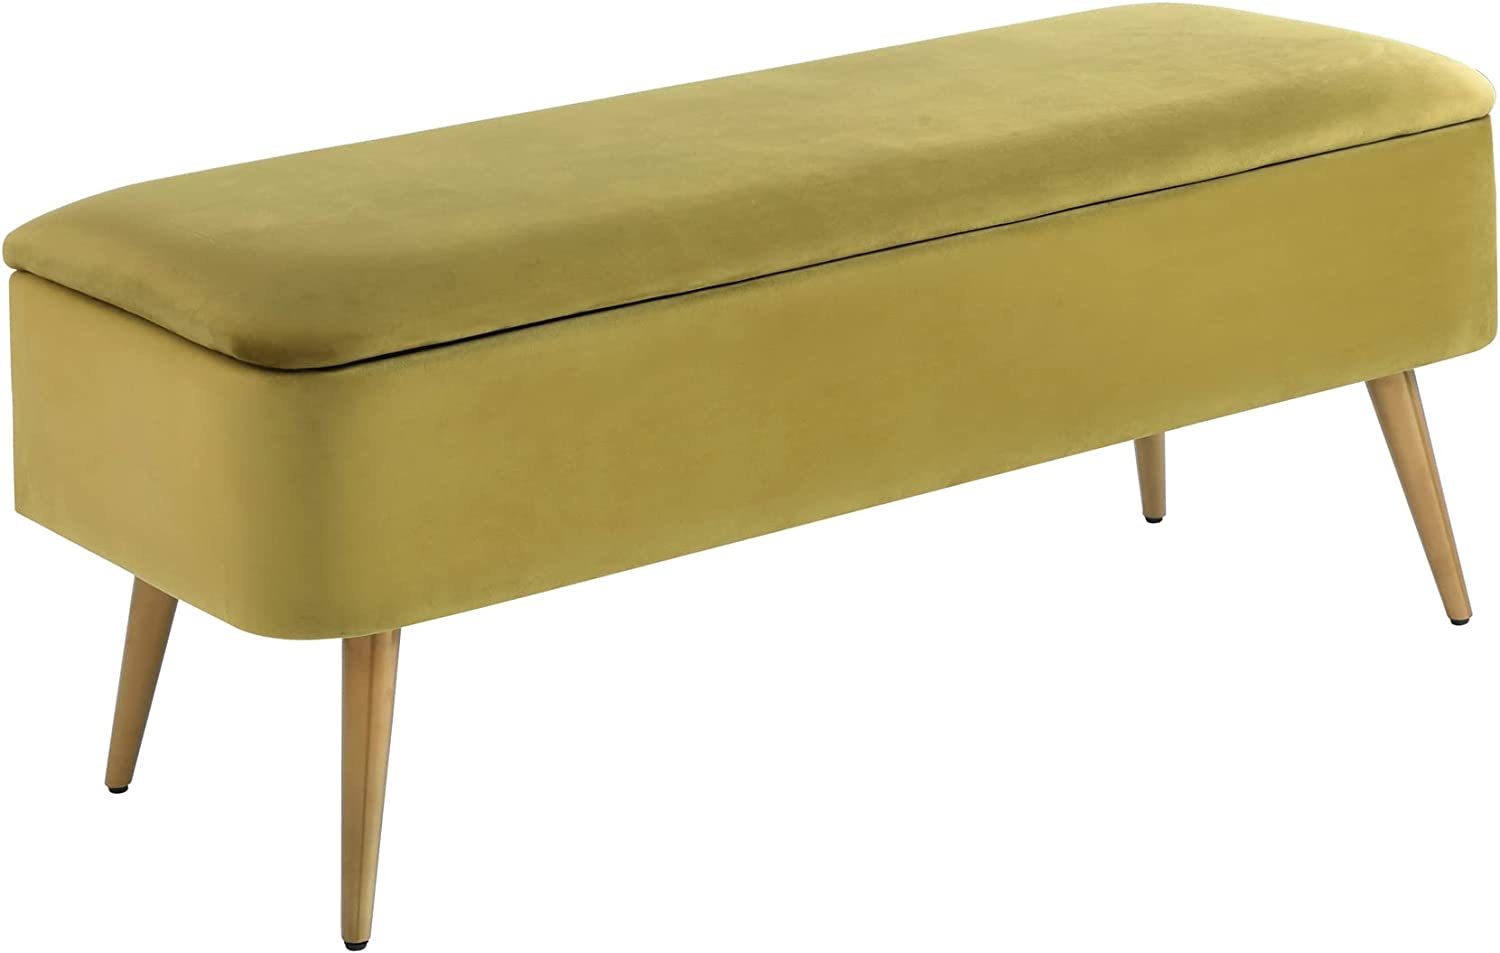 Primary image for Avocado Green 42" W Ball And Cast Upholstered Bench.